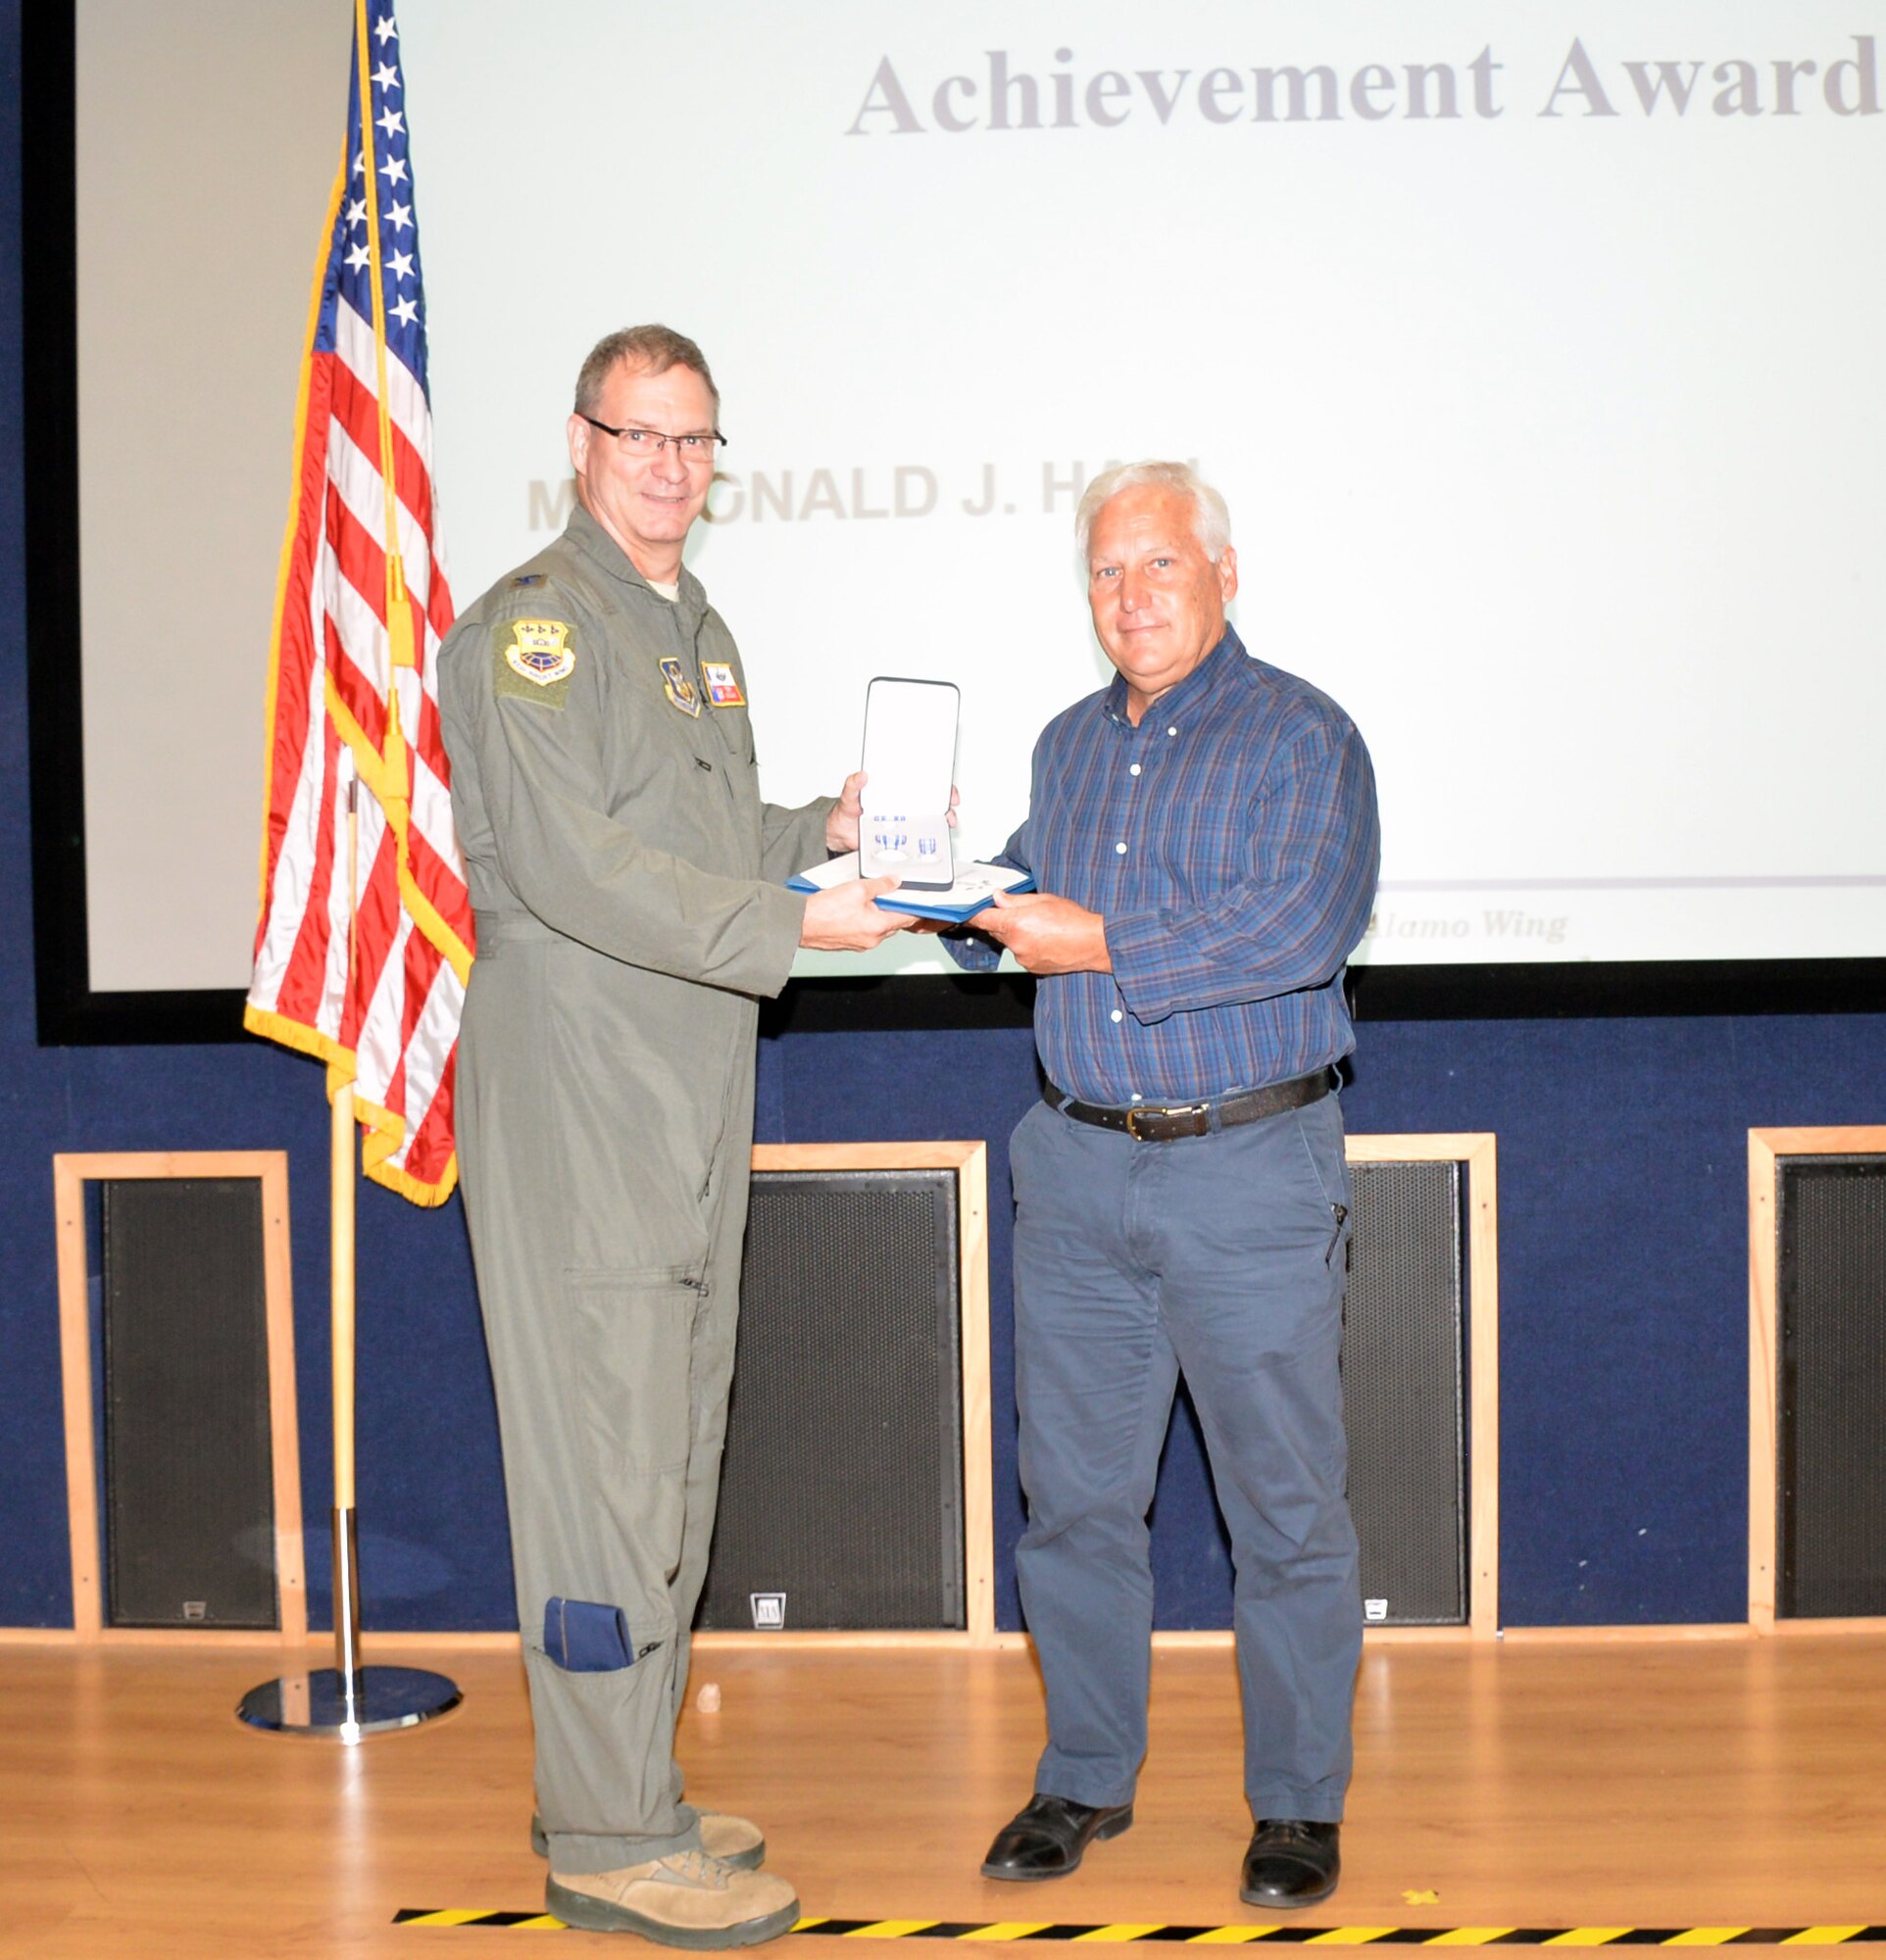 Col. Terry W. McClain, 433rd Airlift Wing commander, presents the award for civilian achievement to Don Hall, 433rd AW deputy chief of safety, June 20, 2019 at Joint Base San Antonio-Lackland, Texas.